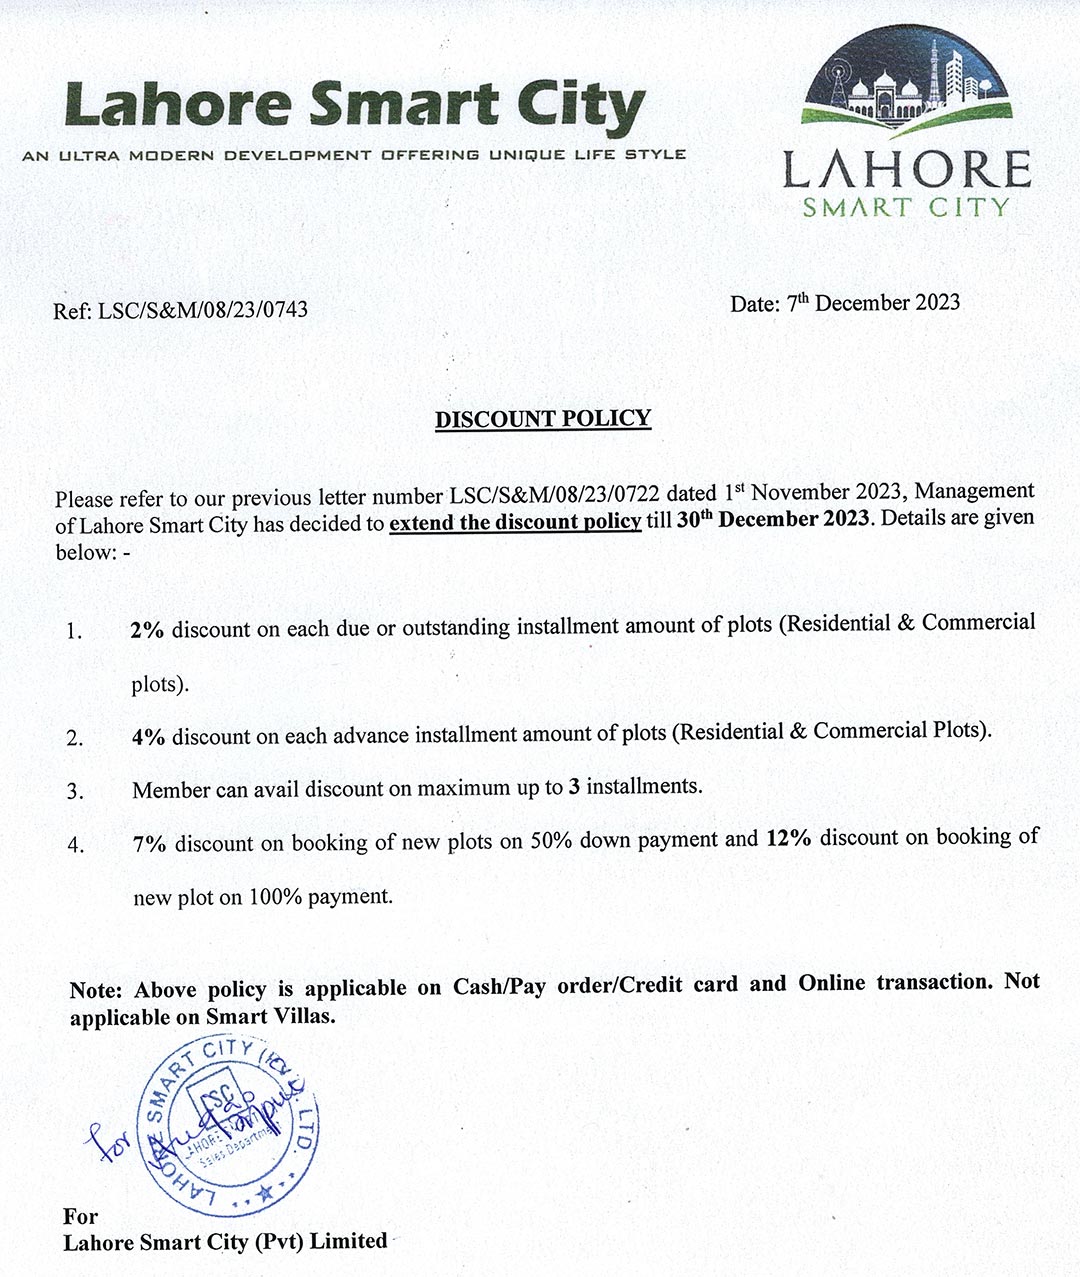 Extension in "Discount Policy" for Lahore Smart City